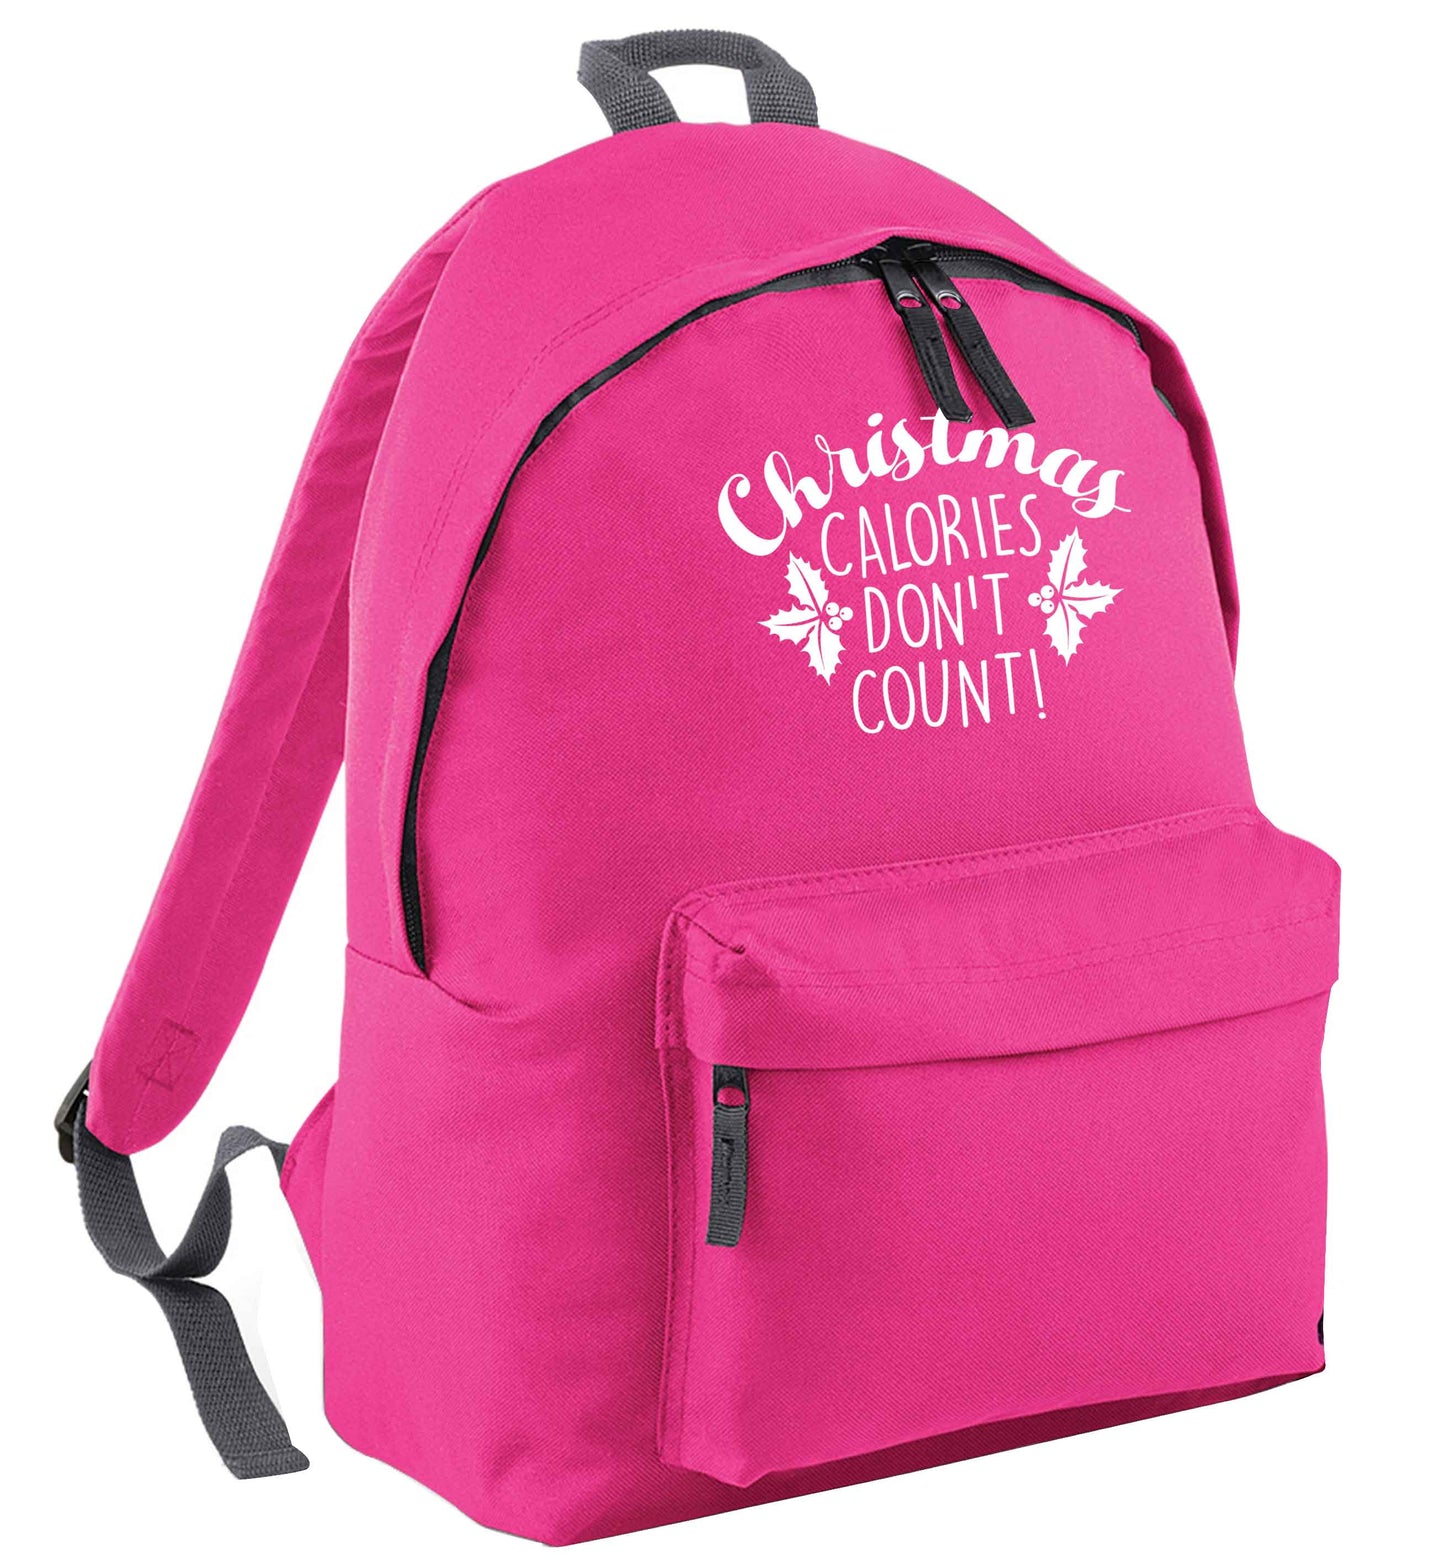 Christmas calories don't count pink adults backpack